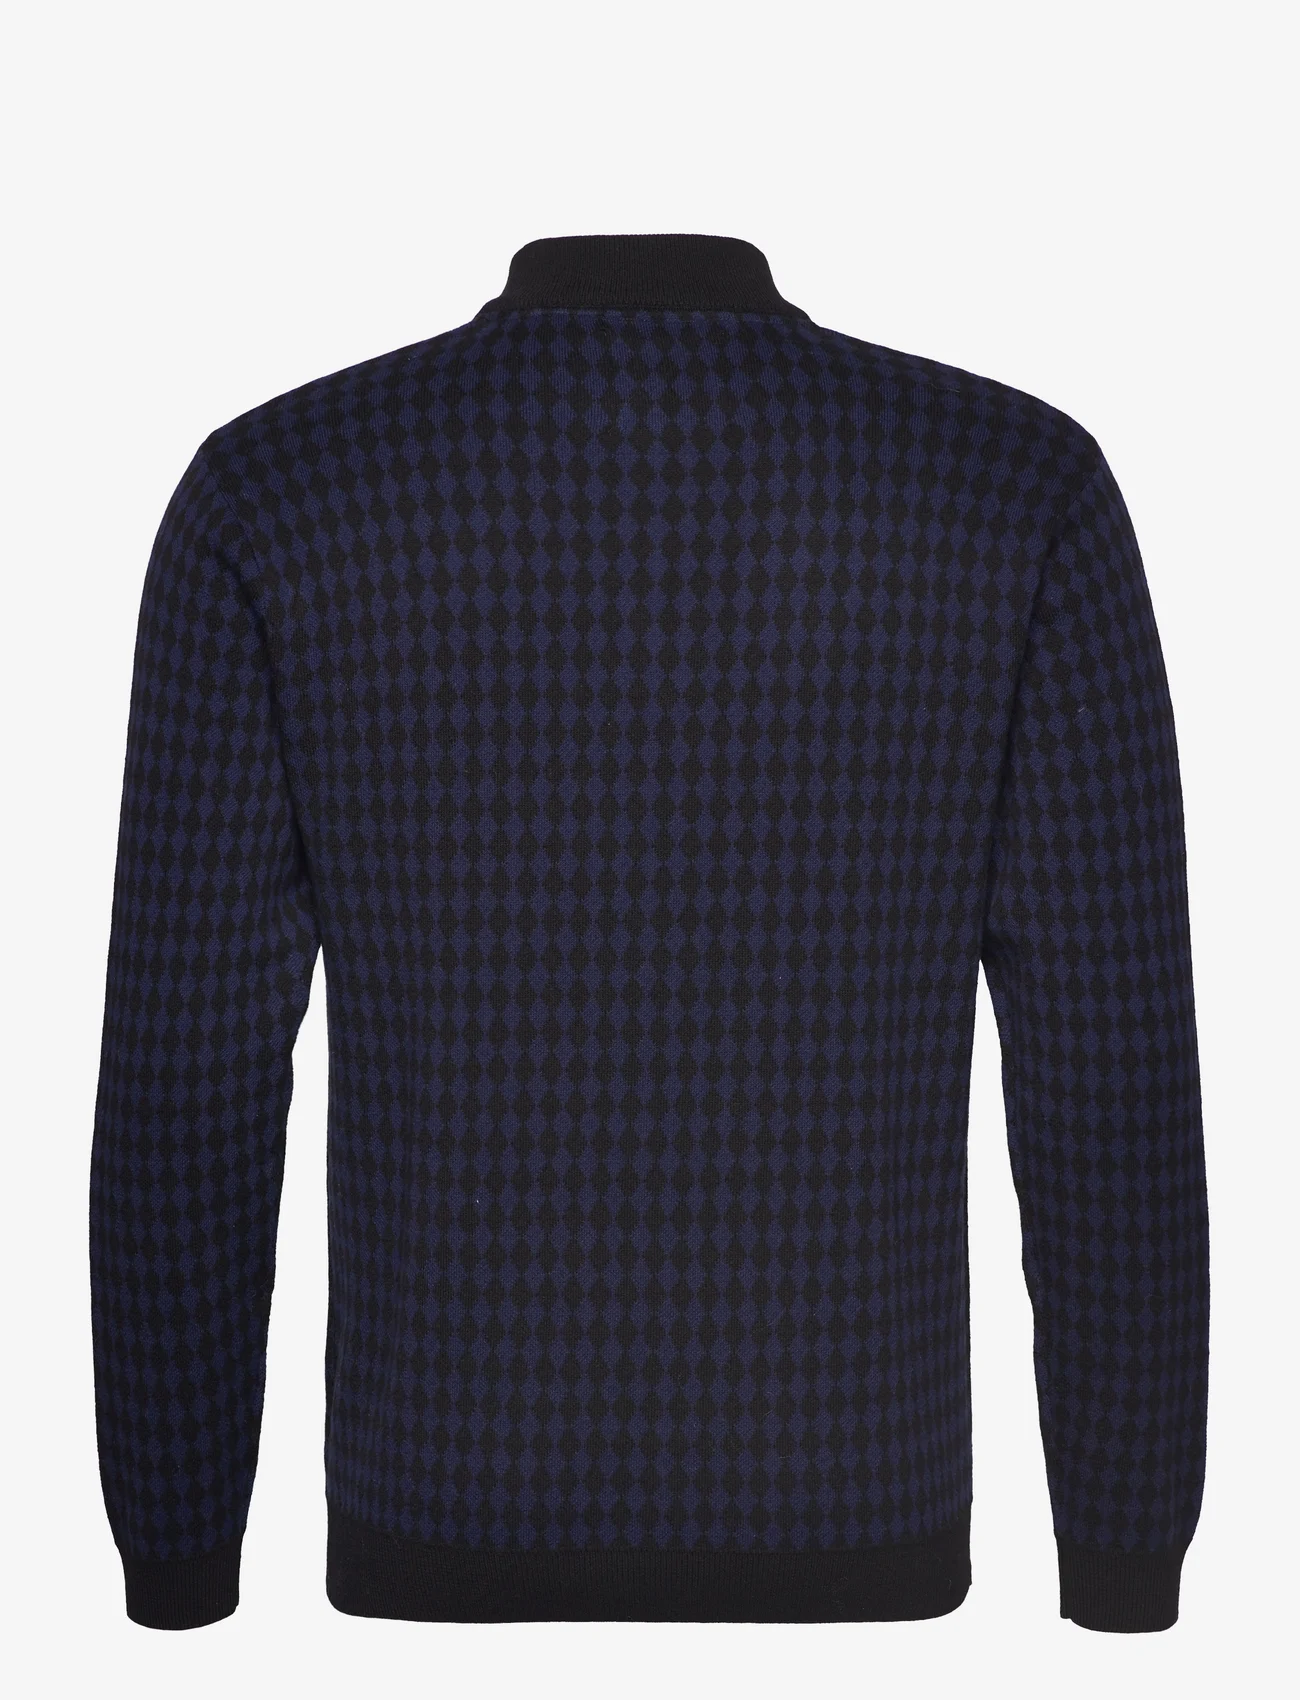 Percival - Mini Harlequin Zip Pullover | Knitted Cotton | Navy - mehed - navy - 1